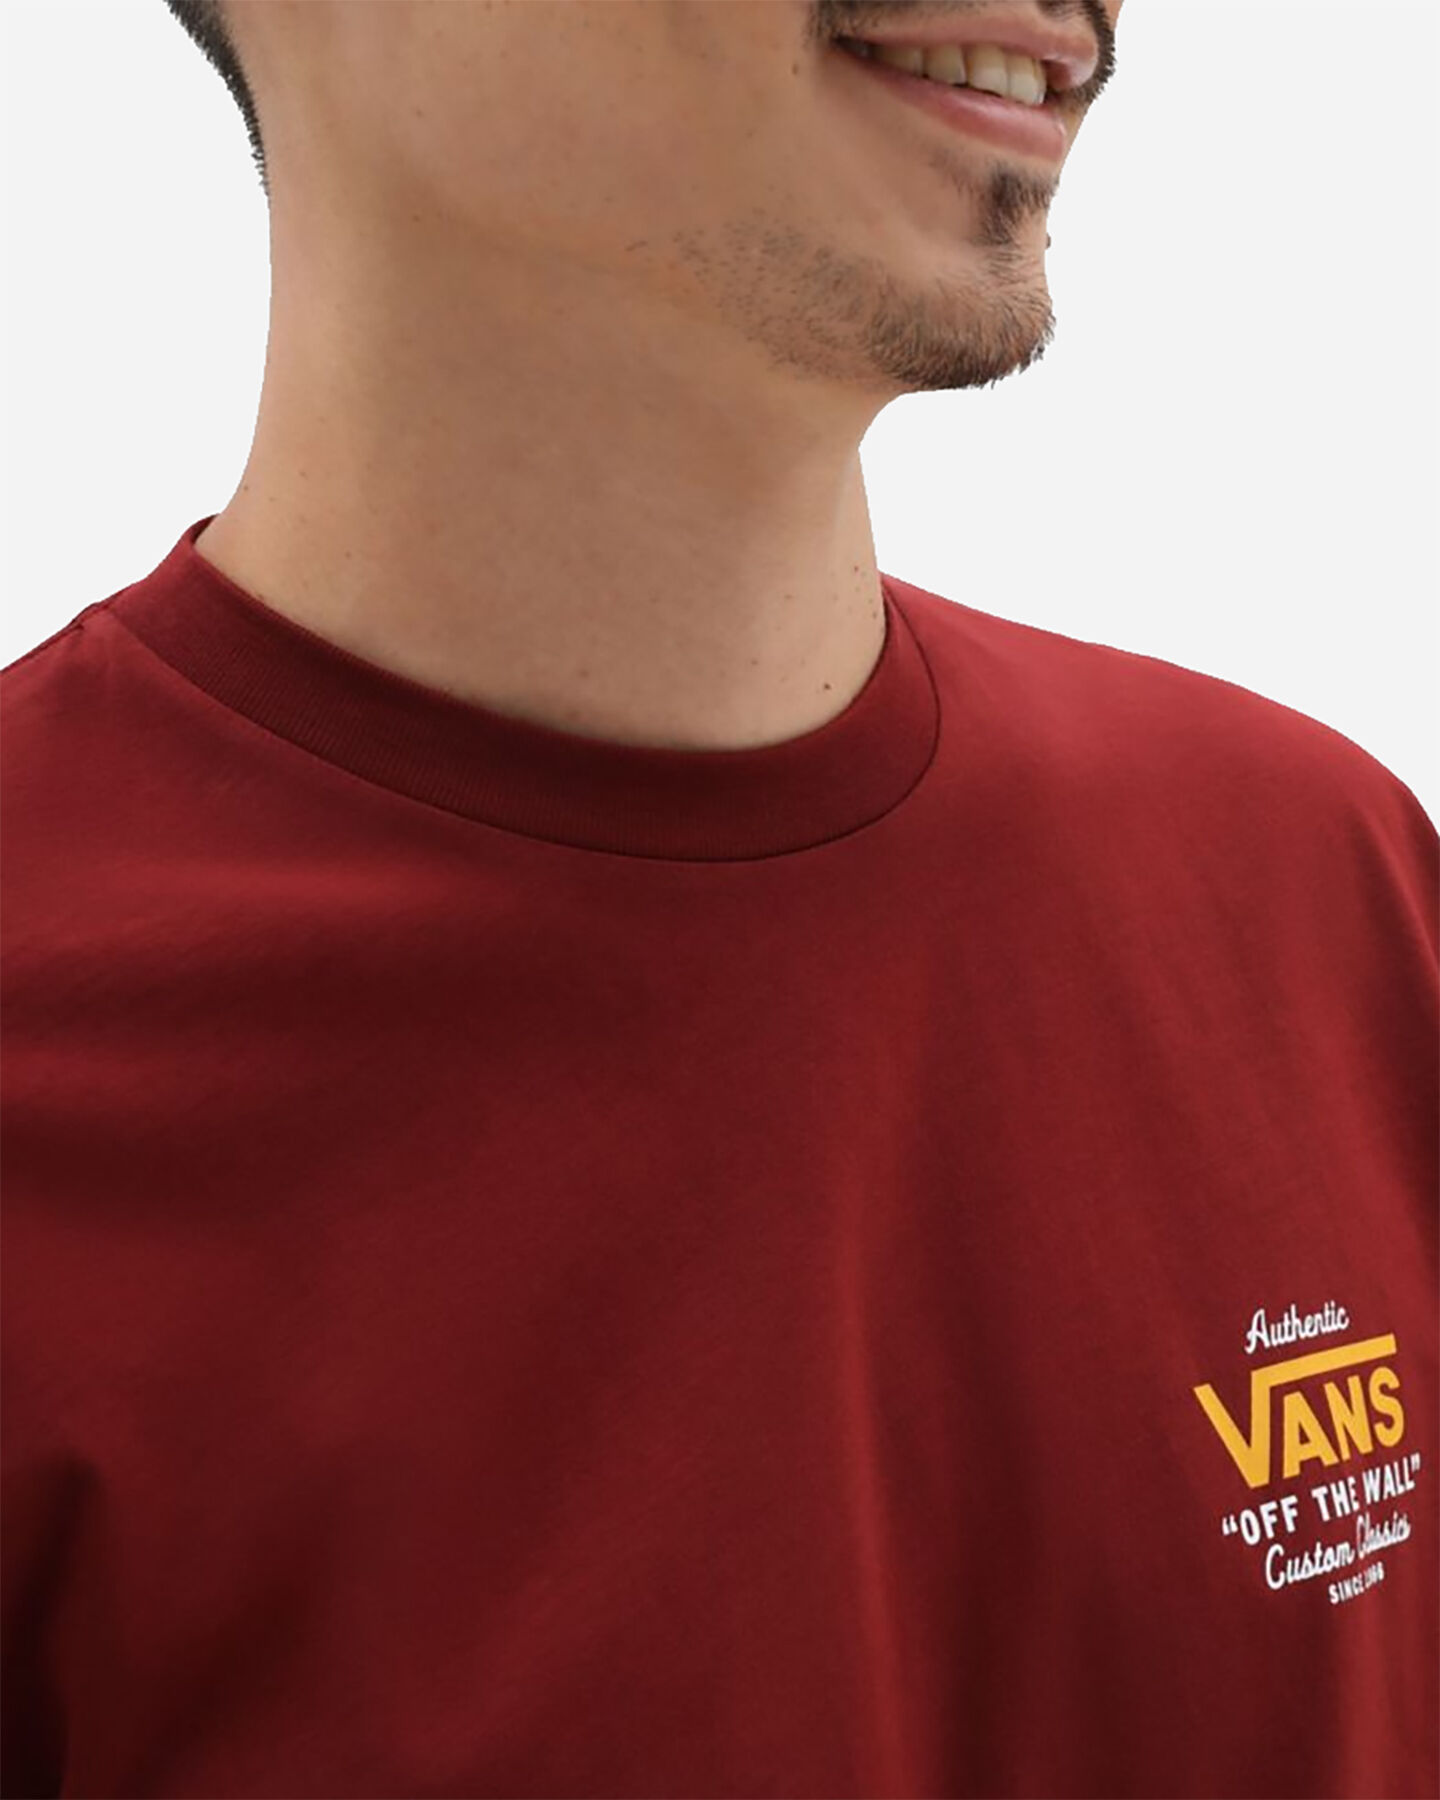  T-Shirt VANS HOLDER CLASSIC M S5556245|BWE|XS scatto 3